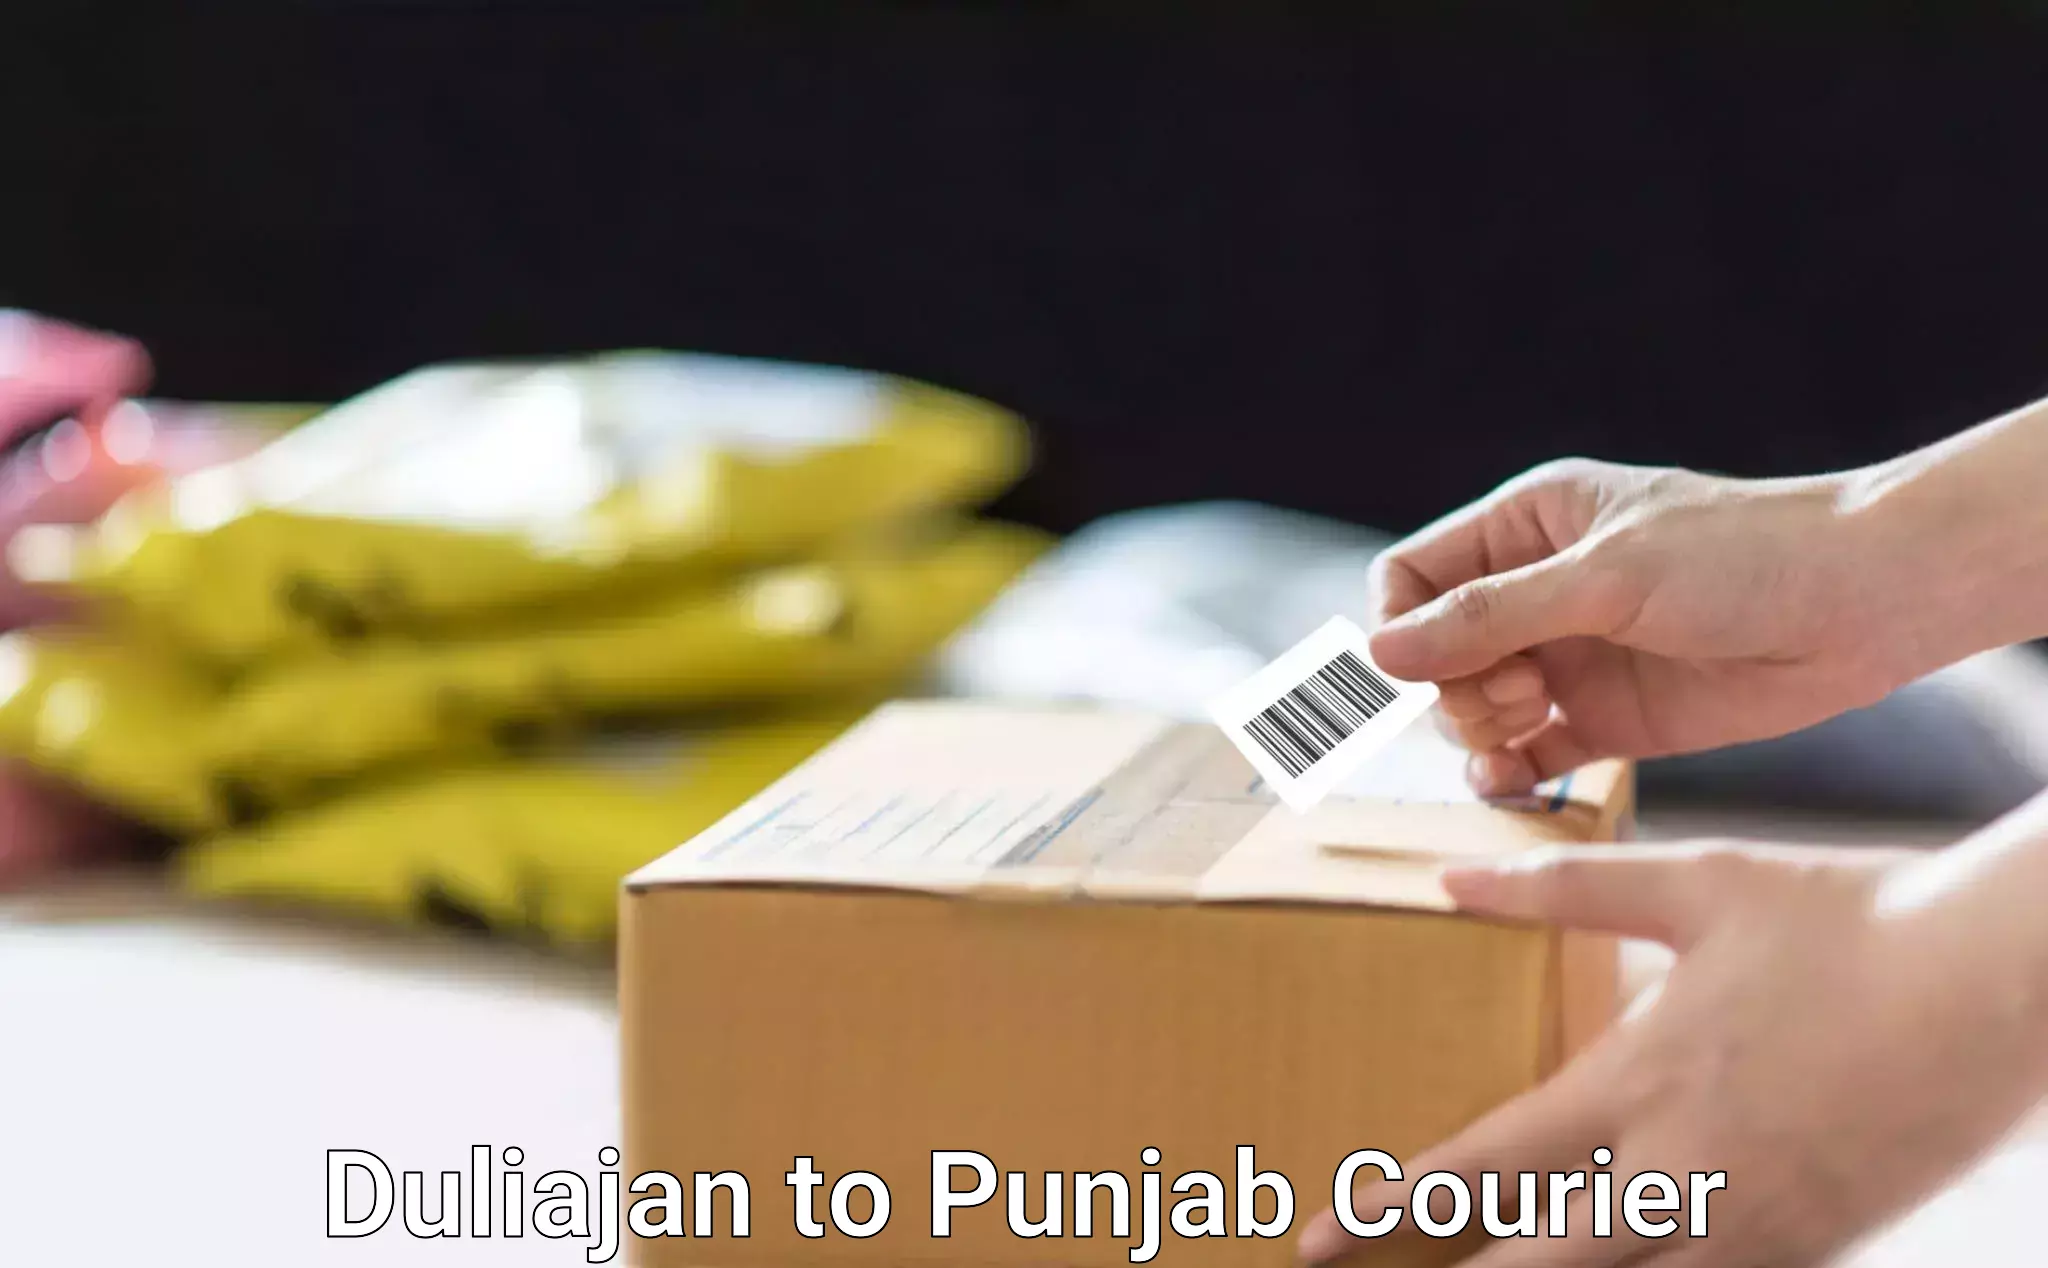 Full-service courier options Duliajan to Punjab